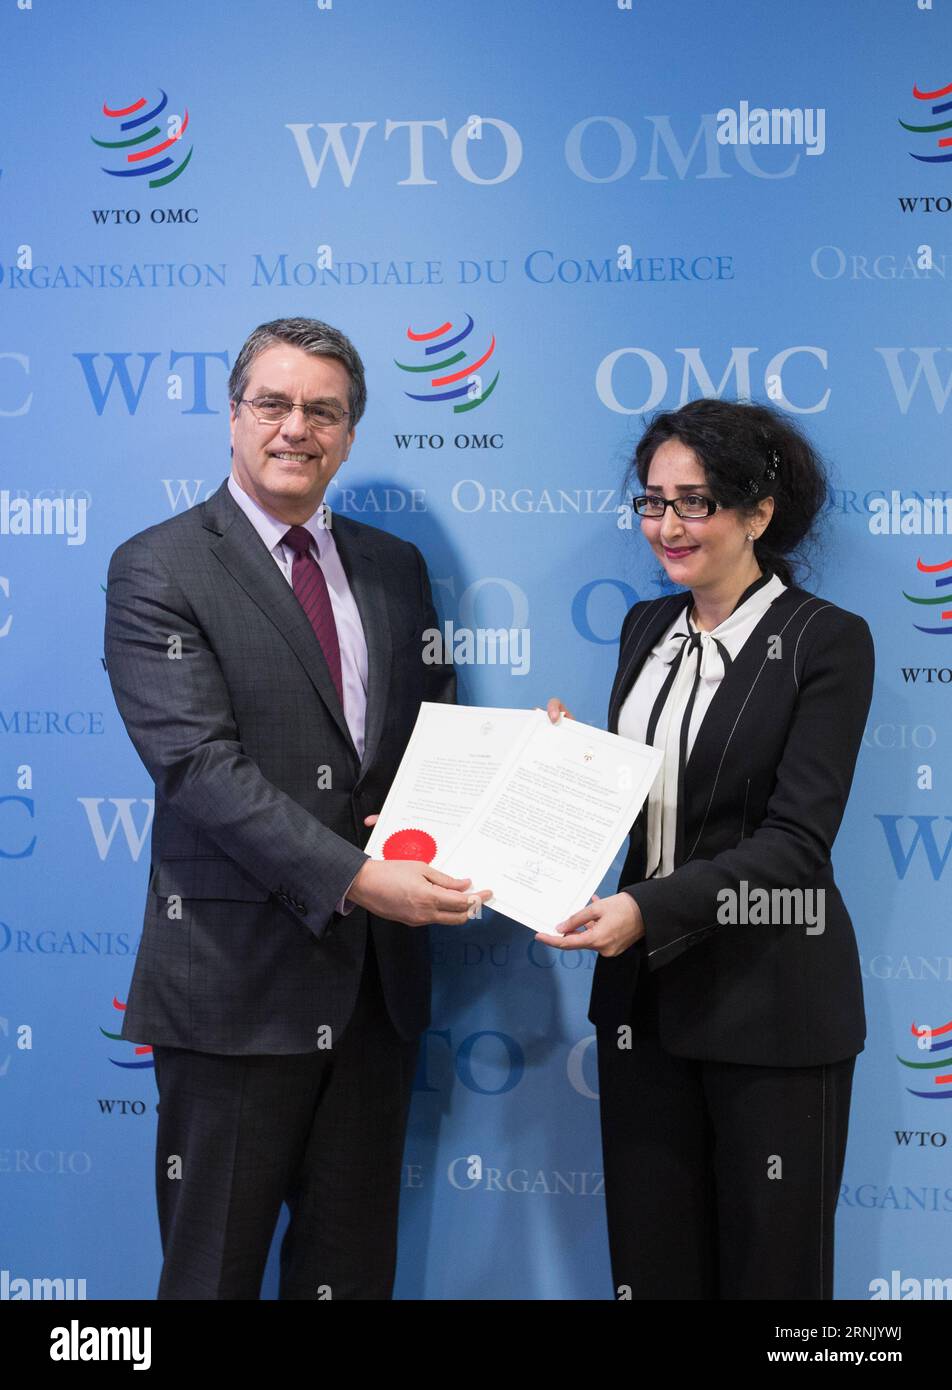 (170222) -- GENEVA, Feb. 22, 2017 -- The World Trade Organization (WTO) Director-General Roberto Azevedo (L) and Saja Majali, Ambassador and Permanent Representative of Jordan to the United Nations Office, show the signed document to the media in the headquarters of WTO in Geneva, Switzerland, Feb. 22, 2017. Azevedo announced on Wednesday the Trade Facilitation Agreement (TFA) entered into force after two-thirds of members have completed their domestic ratification process. Rwanda, Oman, Chad and Jordan on Wednesday submitted their ratifications of acceptance to Azevedo in WTO s headquarter in Stock Photo